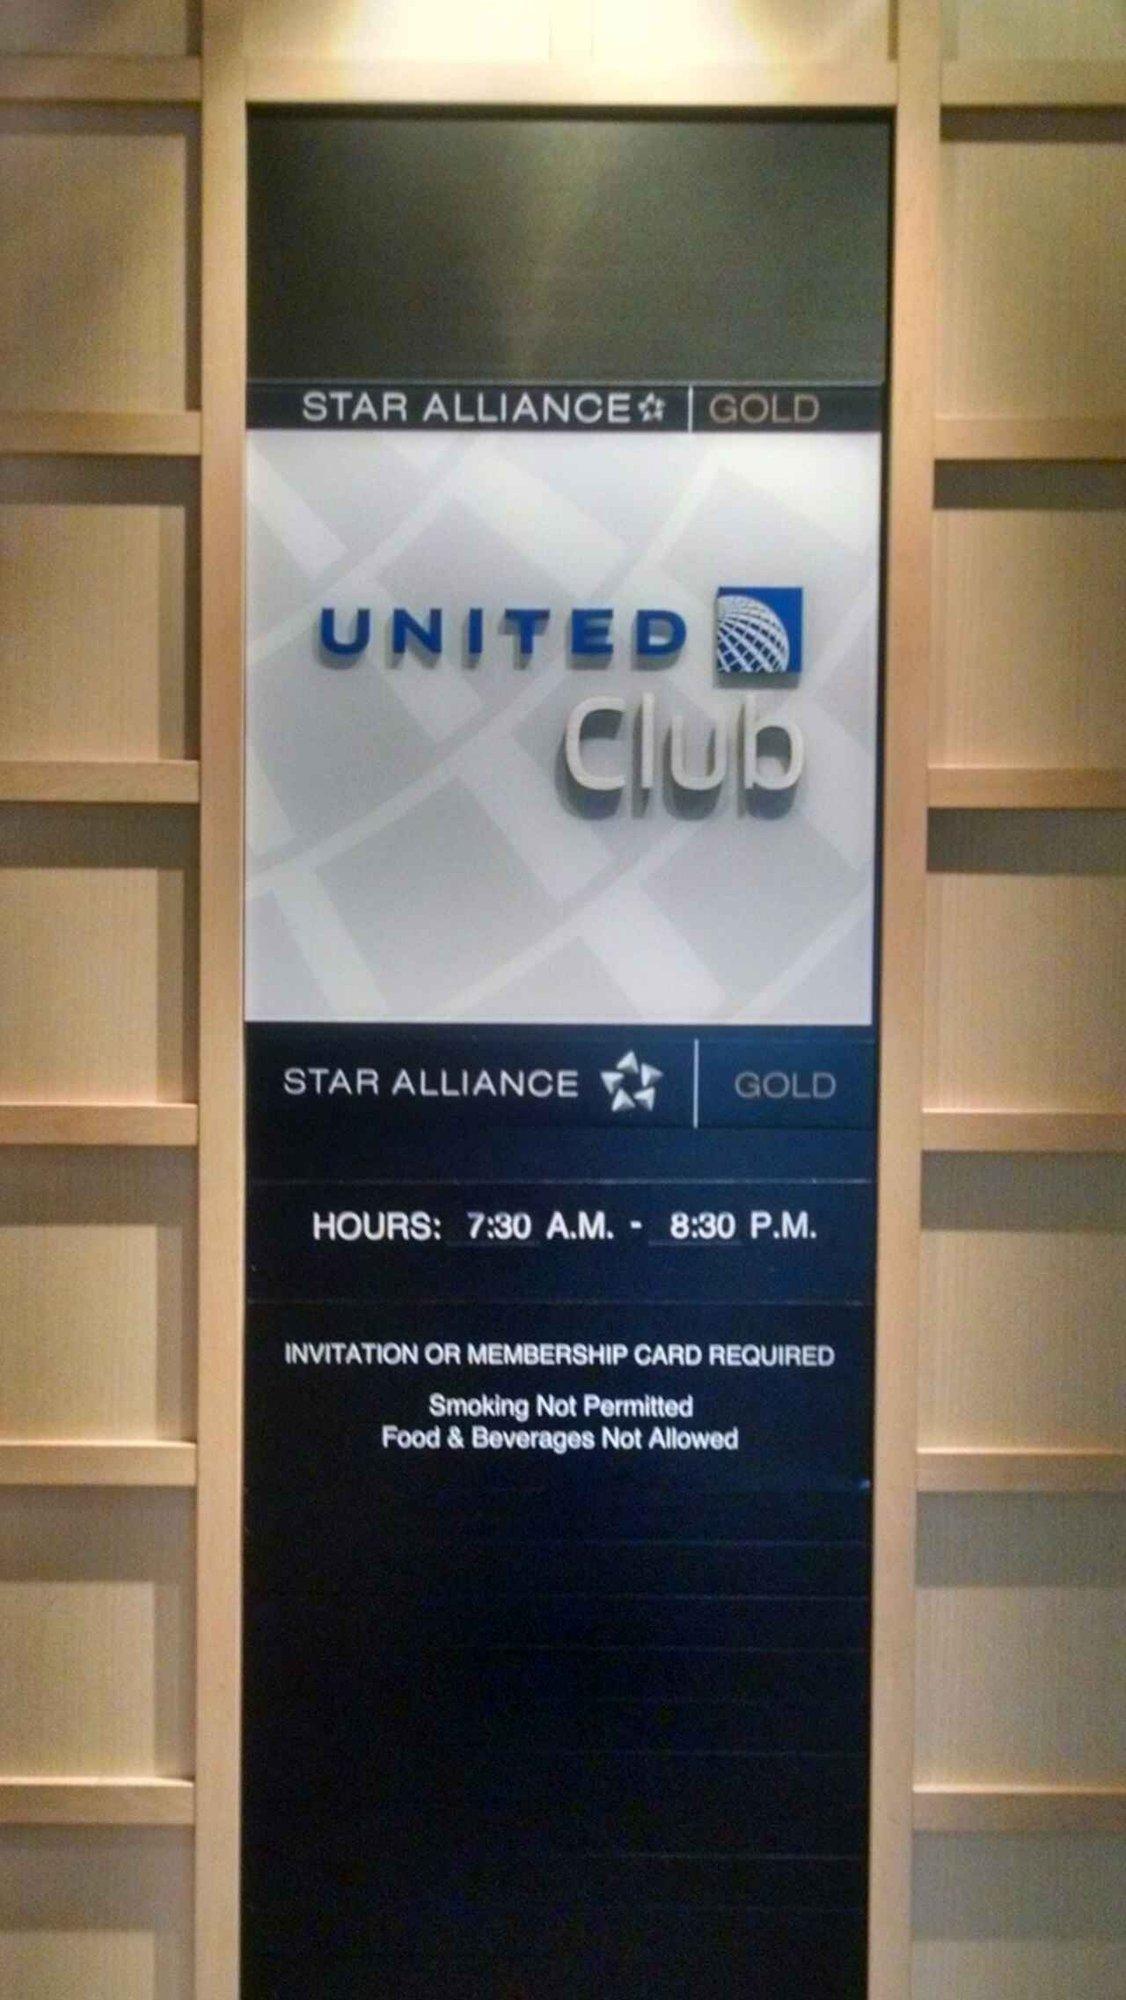 United Airlines United Club image 9 of 52